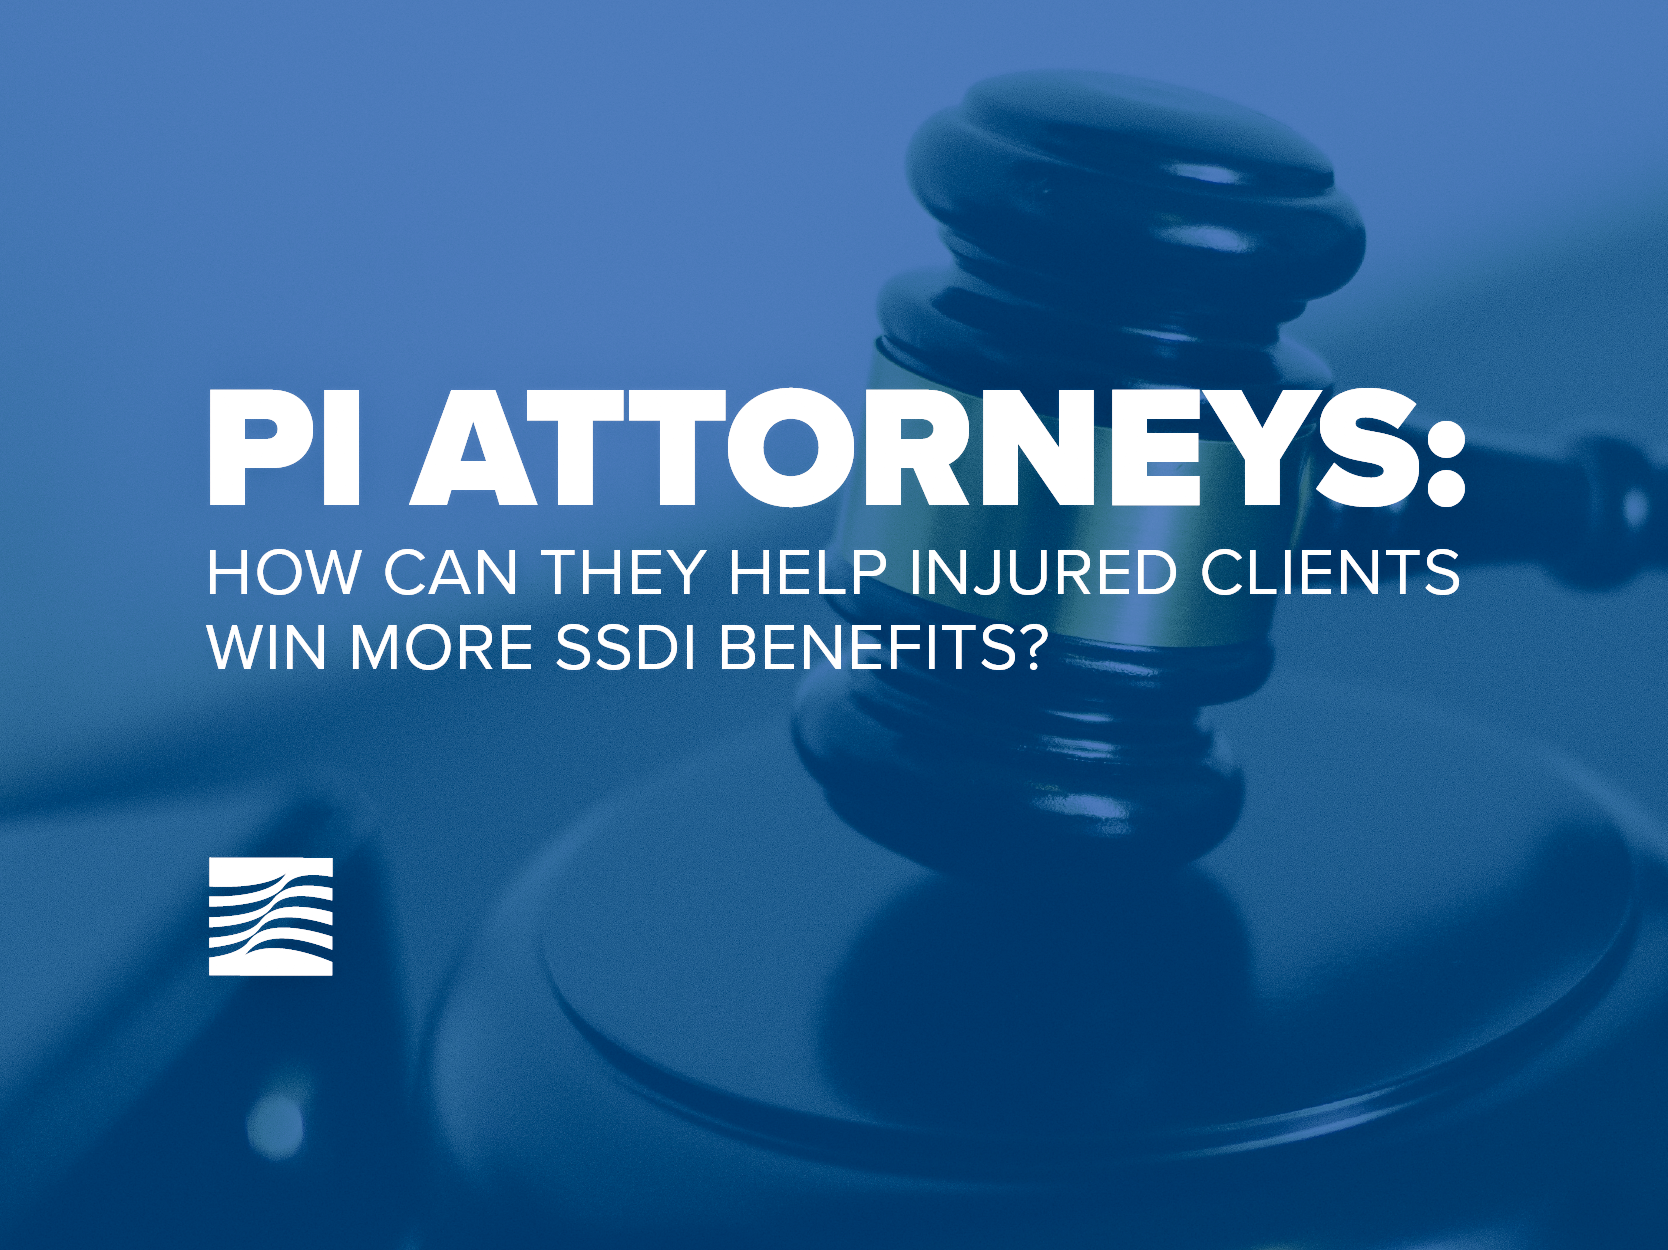 How PI attorneys can help injured clients win more SSDI benefits.